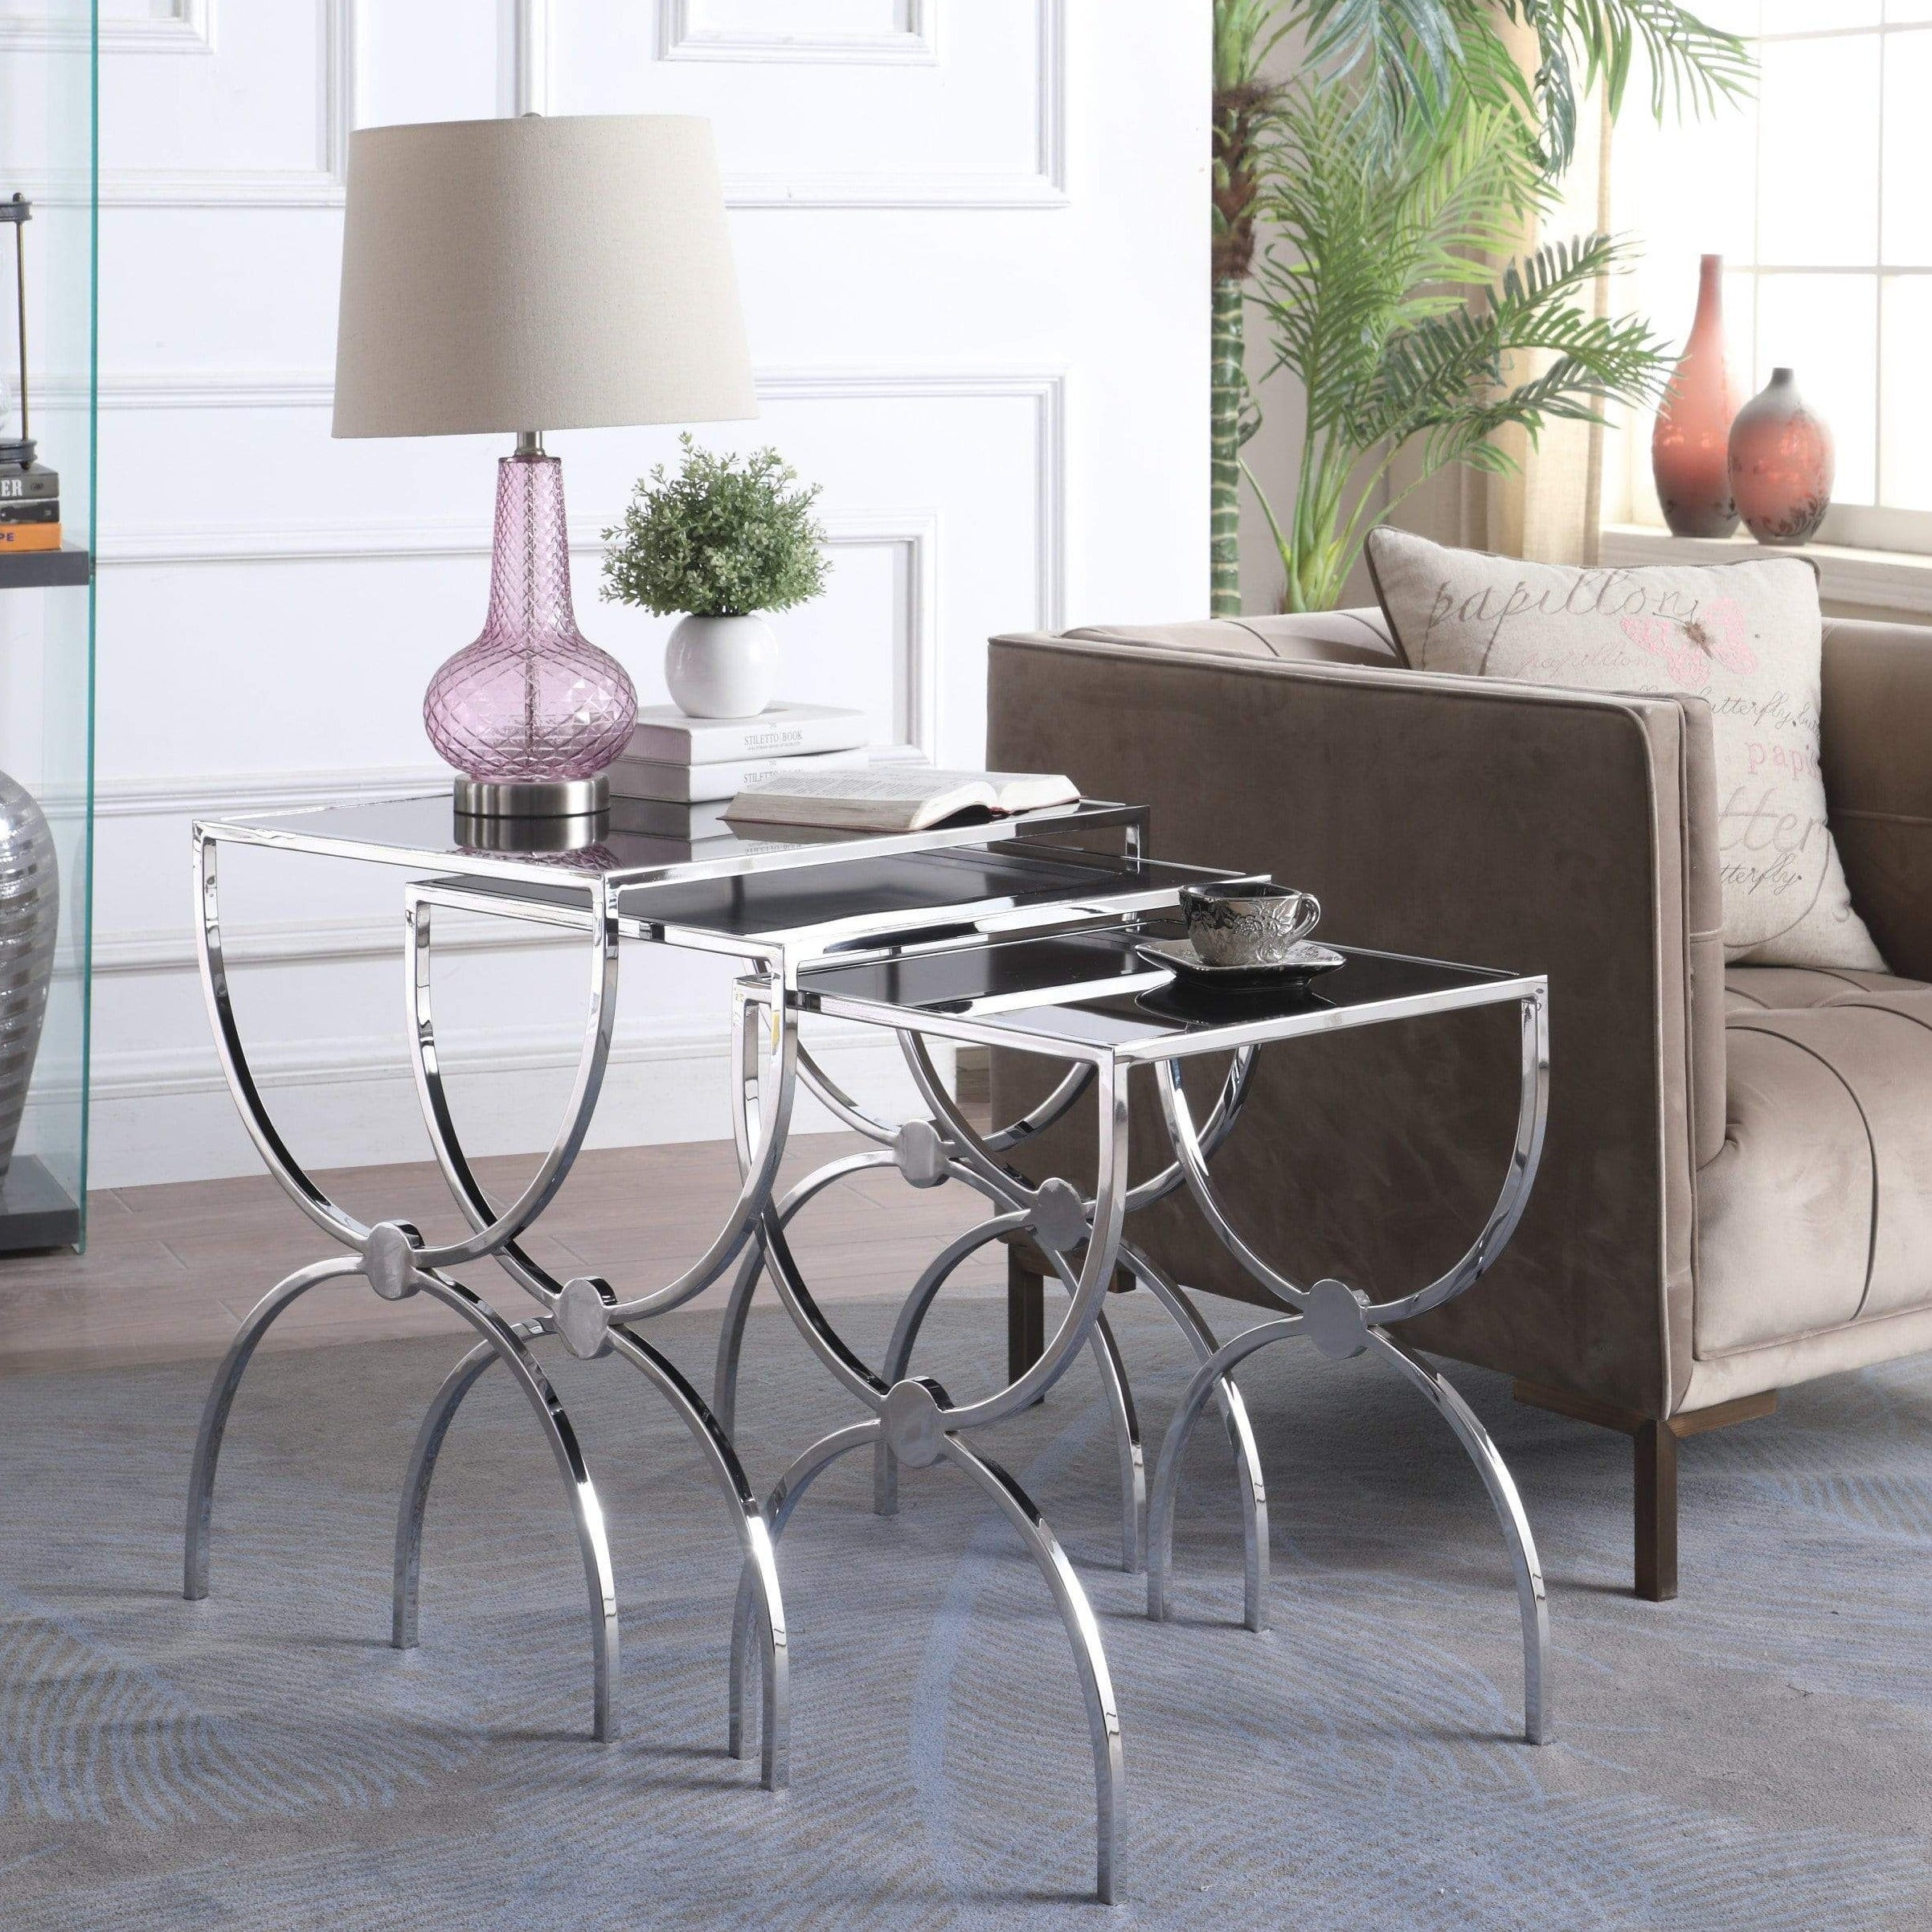 Palyn 3 Piece Nesting End Table Set